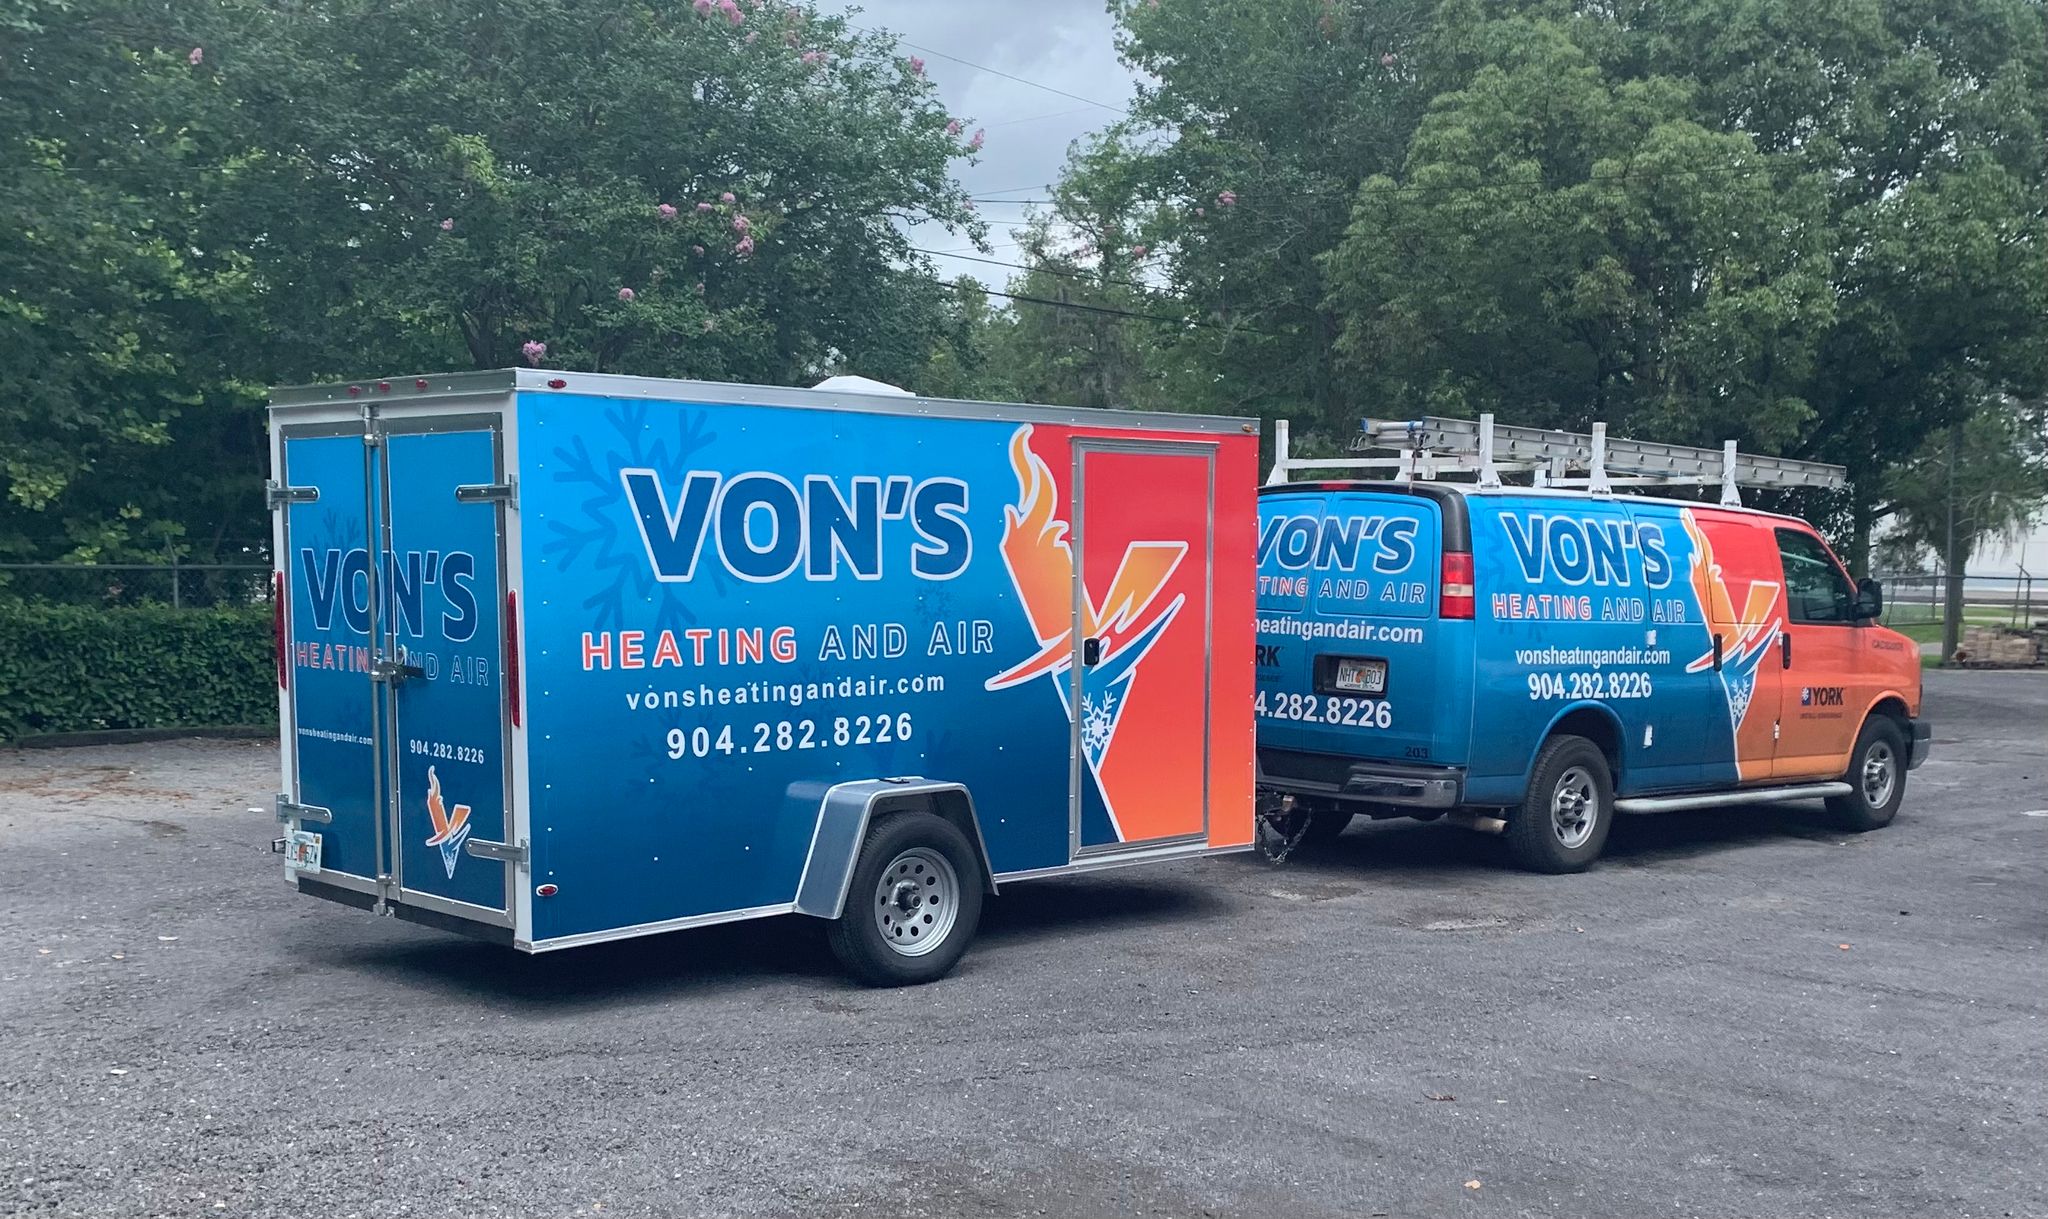 Matching commercial HVAC van and trailer wrapped in customized blue and orange glossy vinyl wraps. "Von's" matching blue and orange HVAC van and trailer wrap designs, created and installed by Wraps Direct.